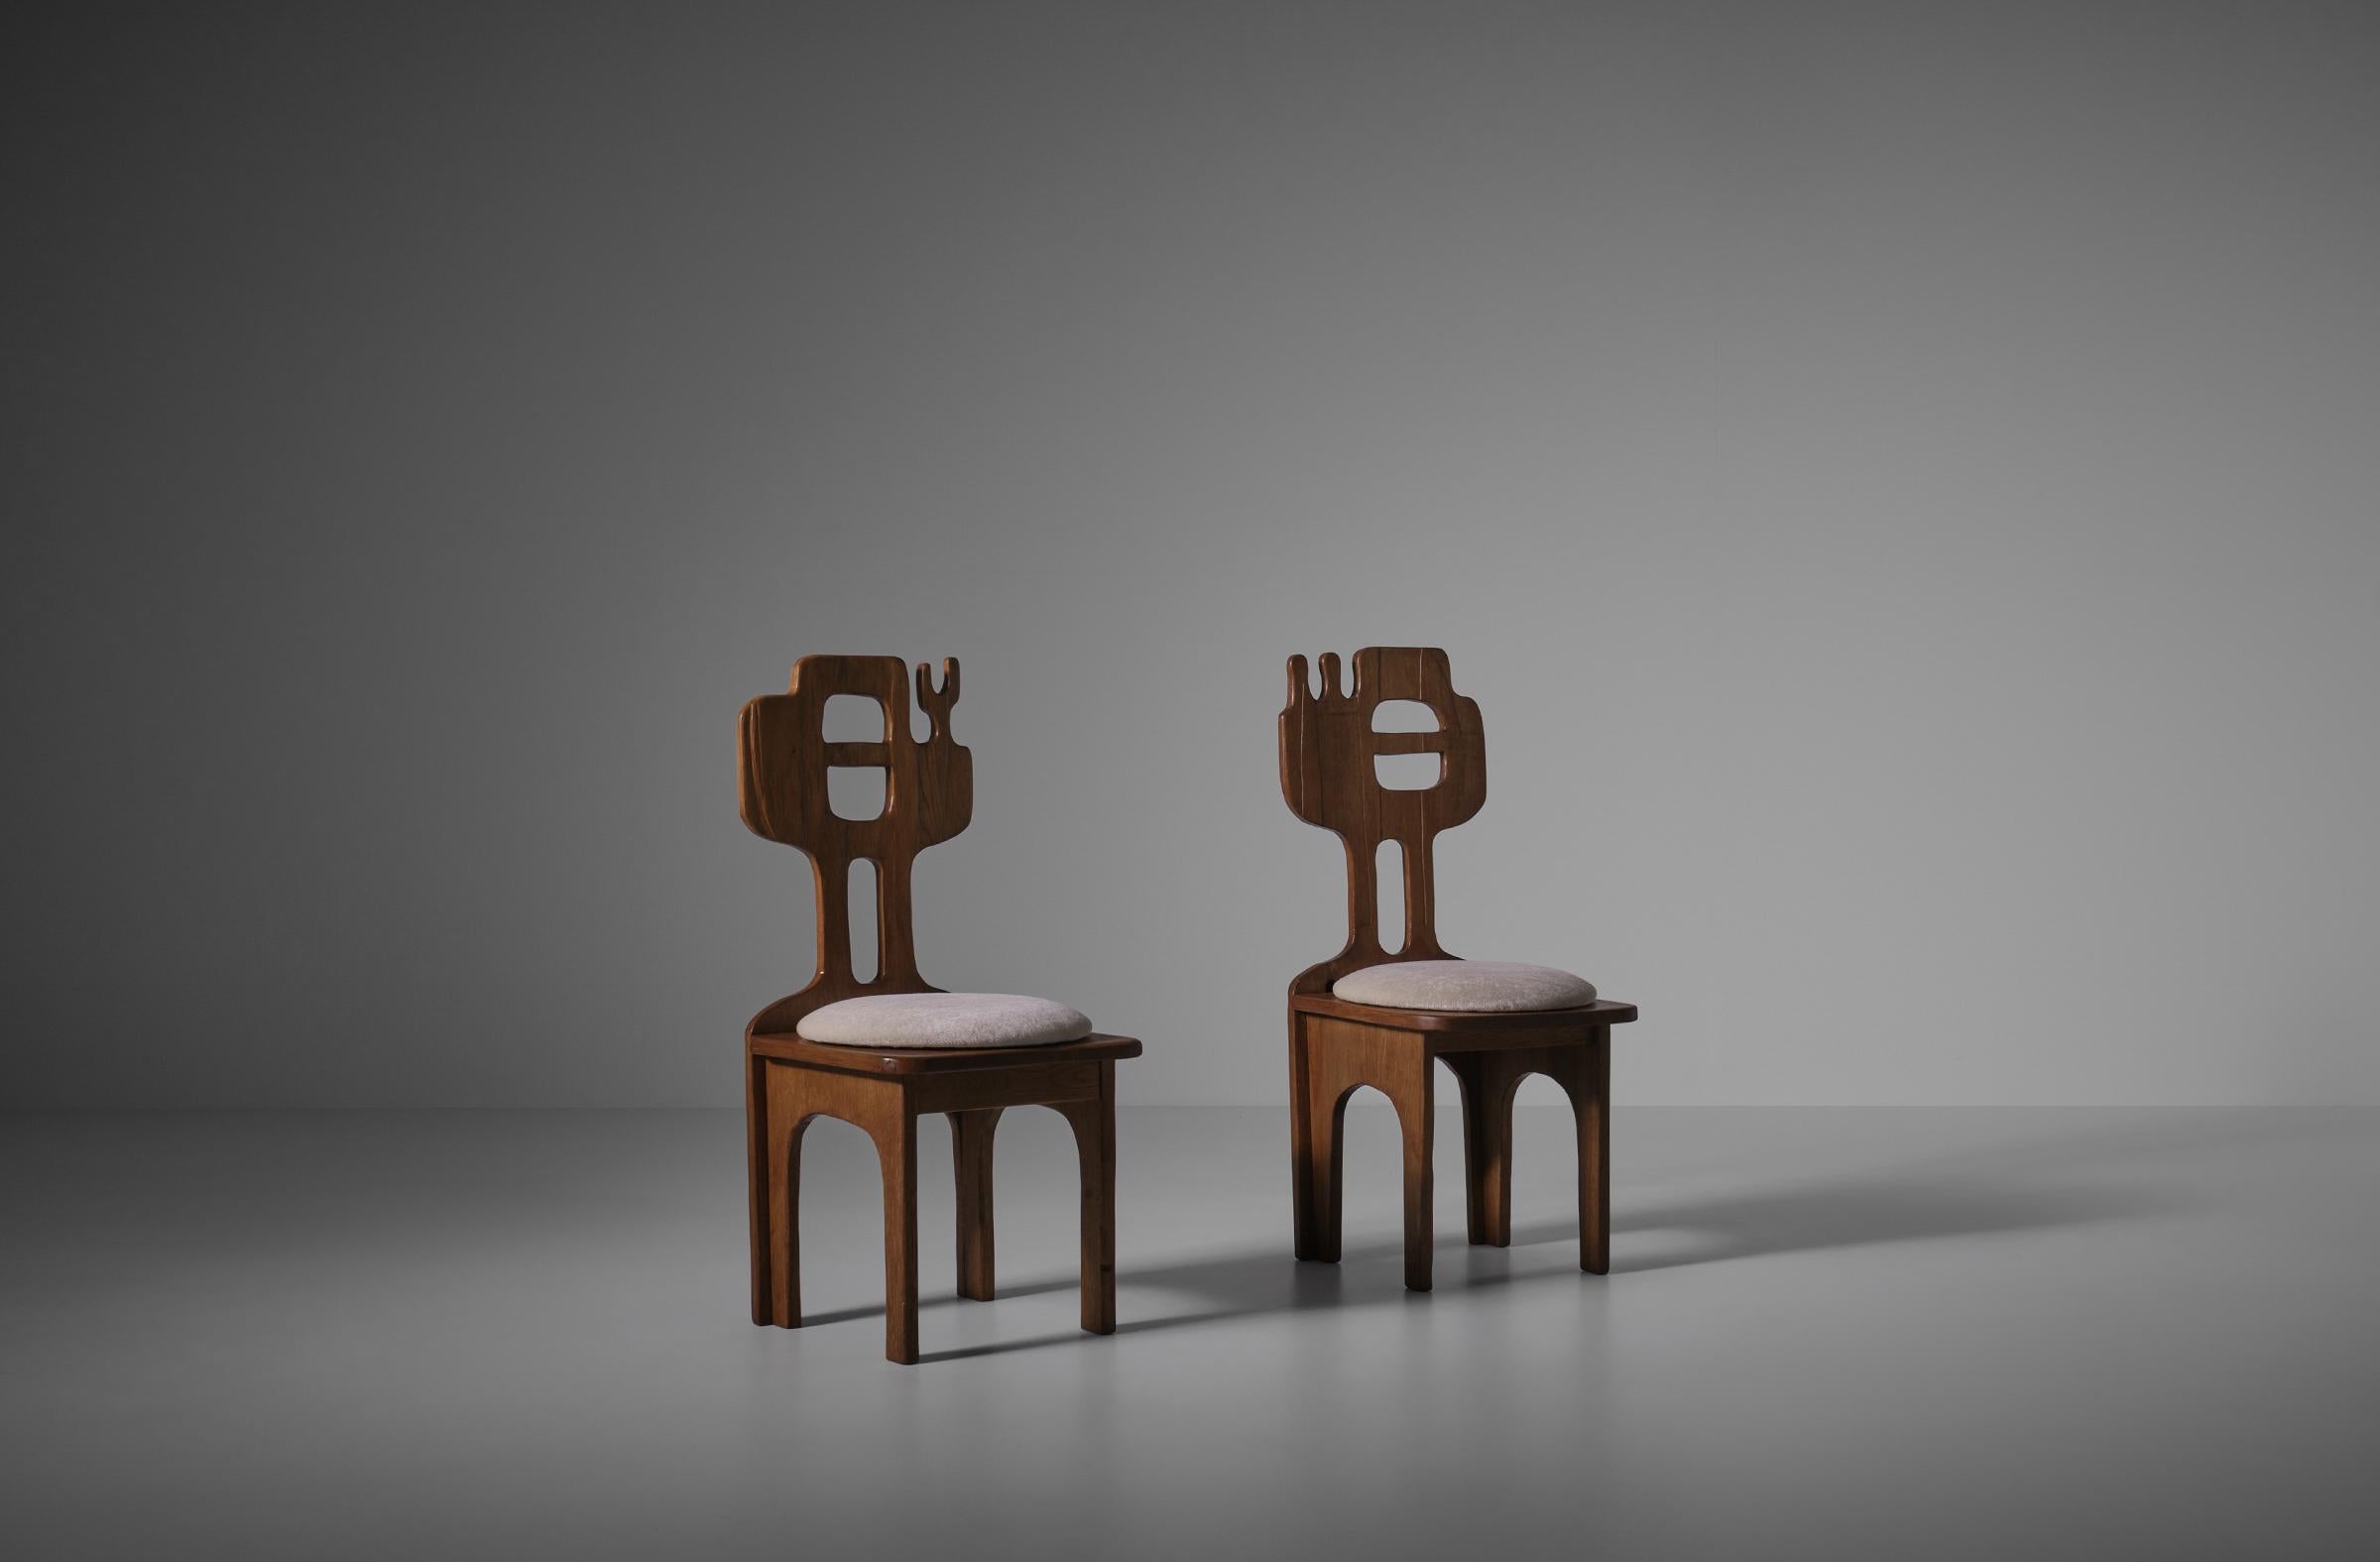 Rare set of sculptural side chairs by Francesco Pasinato (1935 – 2003), 1970s. Pasinato was born in Padua Italy and later moved to Germany. He was an autodidact and created playful sculptures in metal and wood, paintings and graphics. The chairs